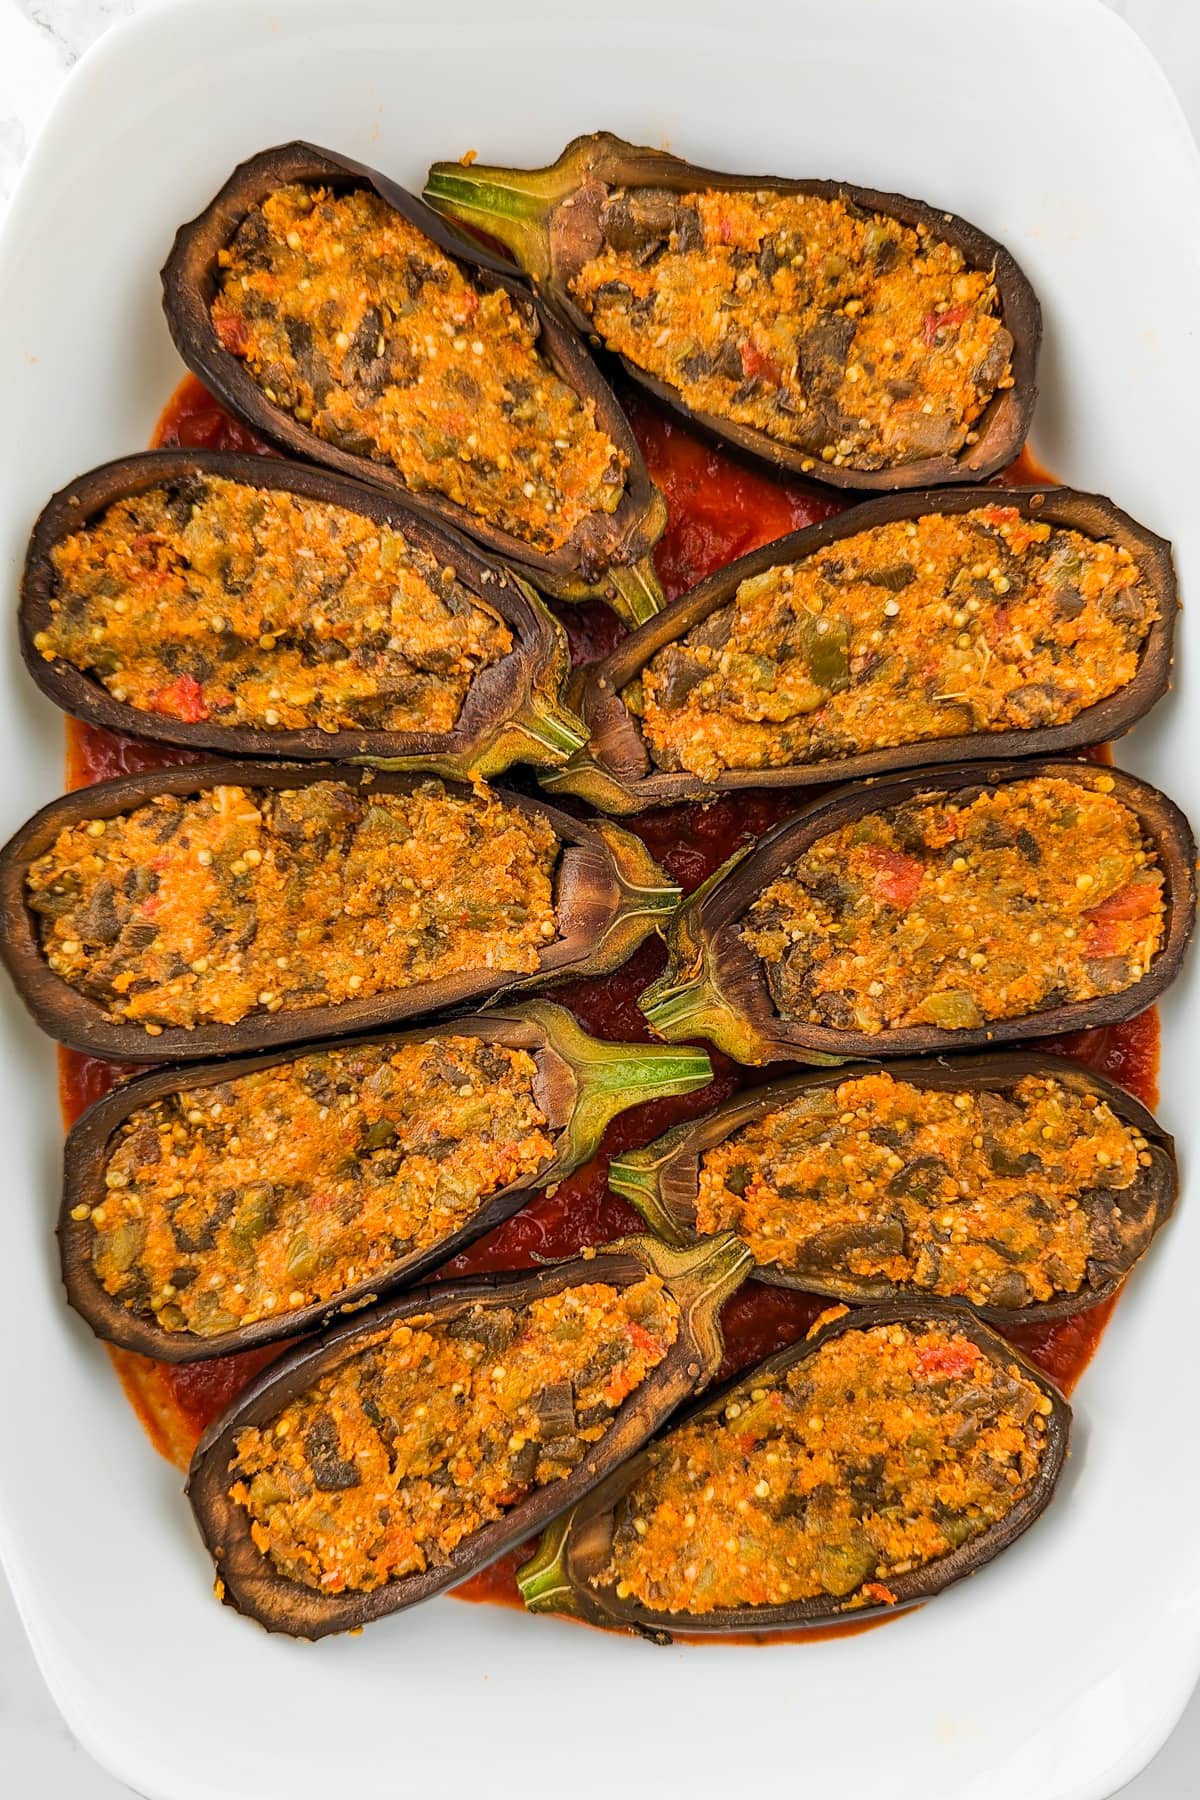 Eggplant boats stuffed with a mixture of eggplant, breadcrumbs, and parmesan cheese.